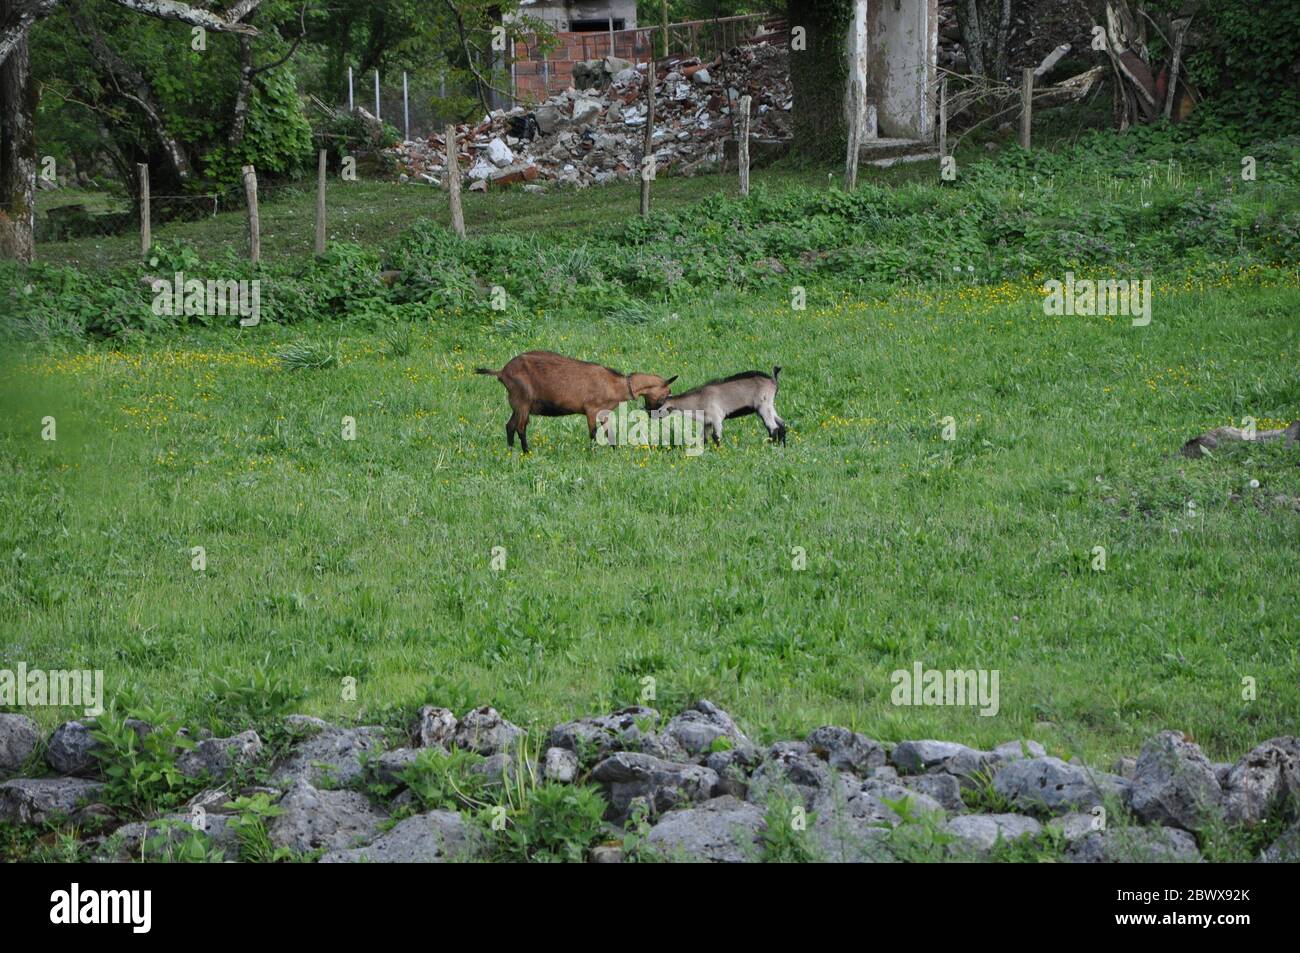 Goat mother and son in the scene of tenderness against the background of green grass. Stock Photo